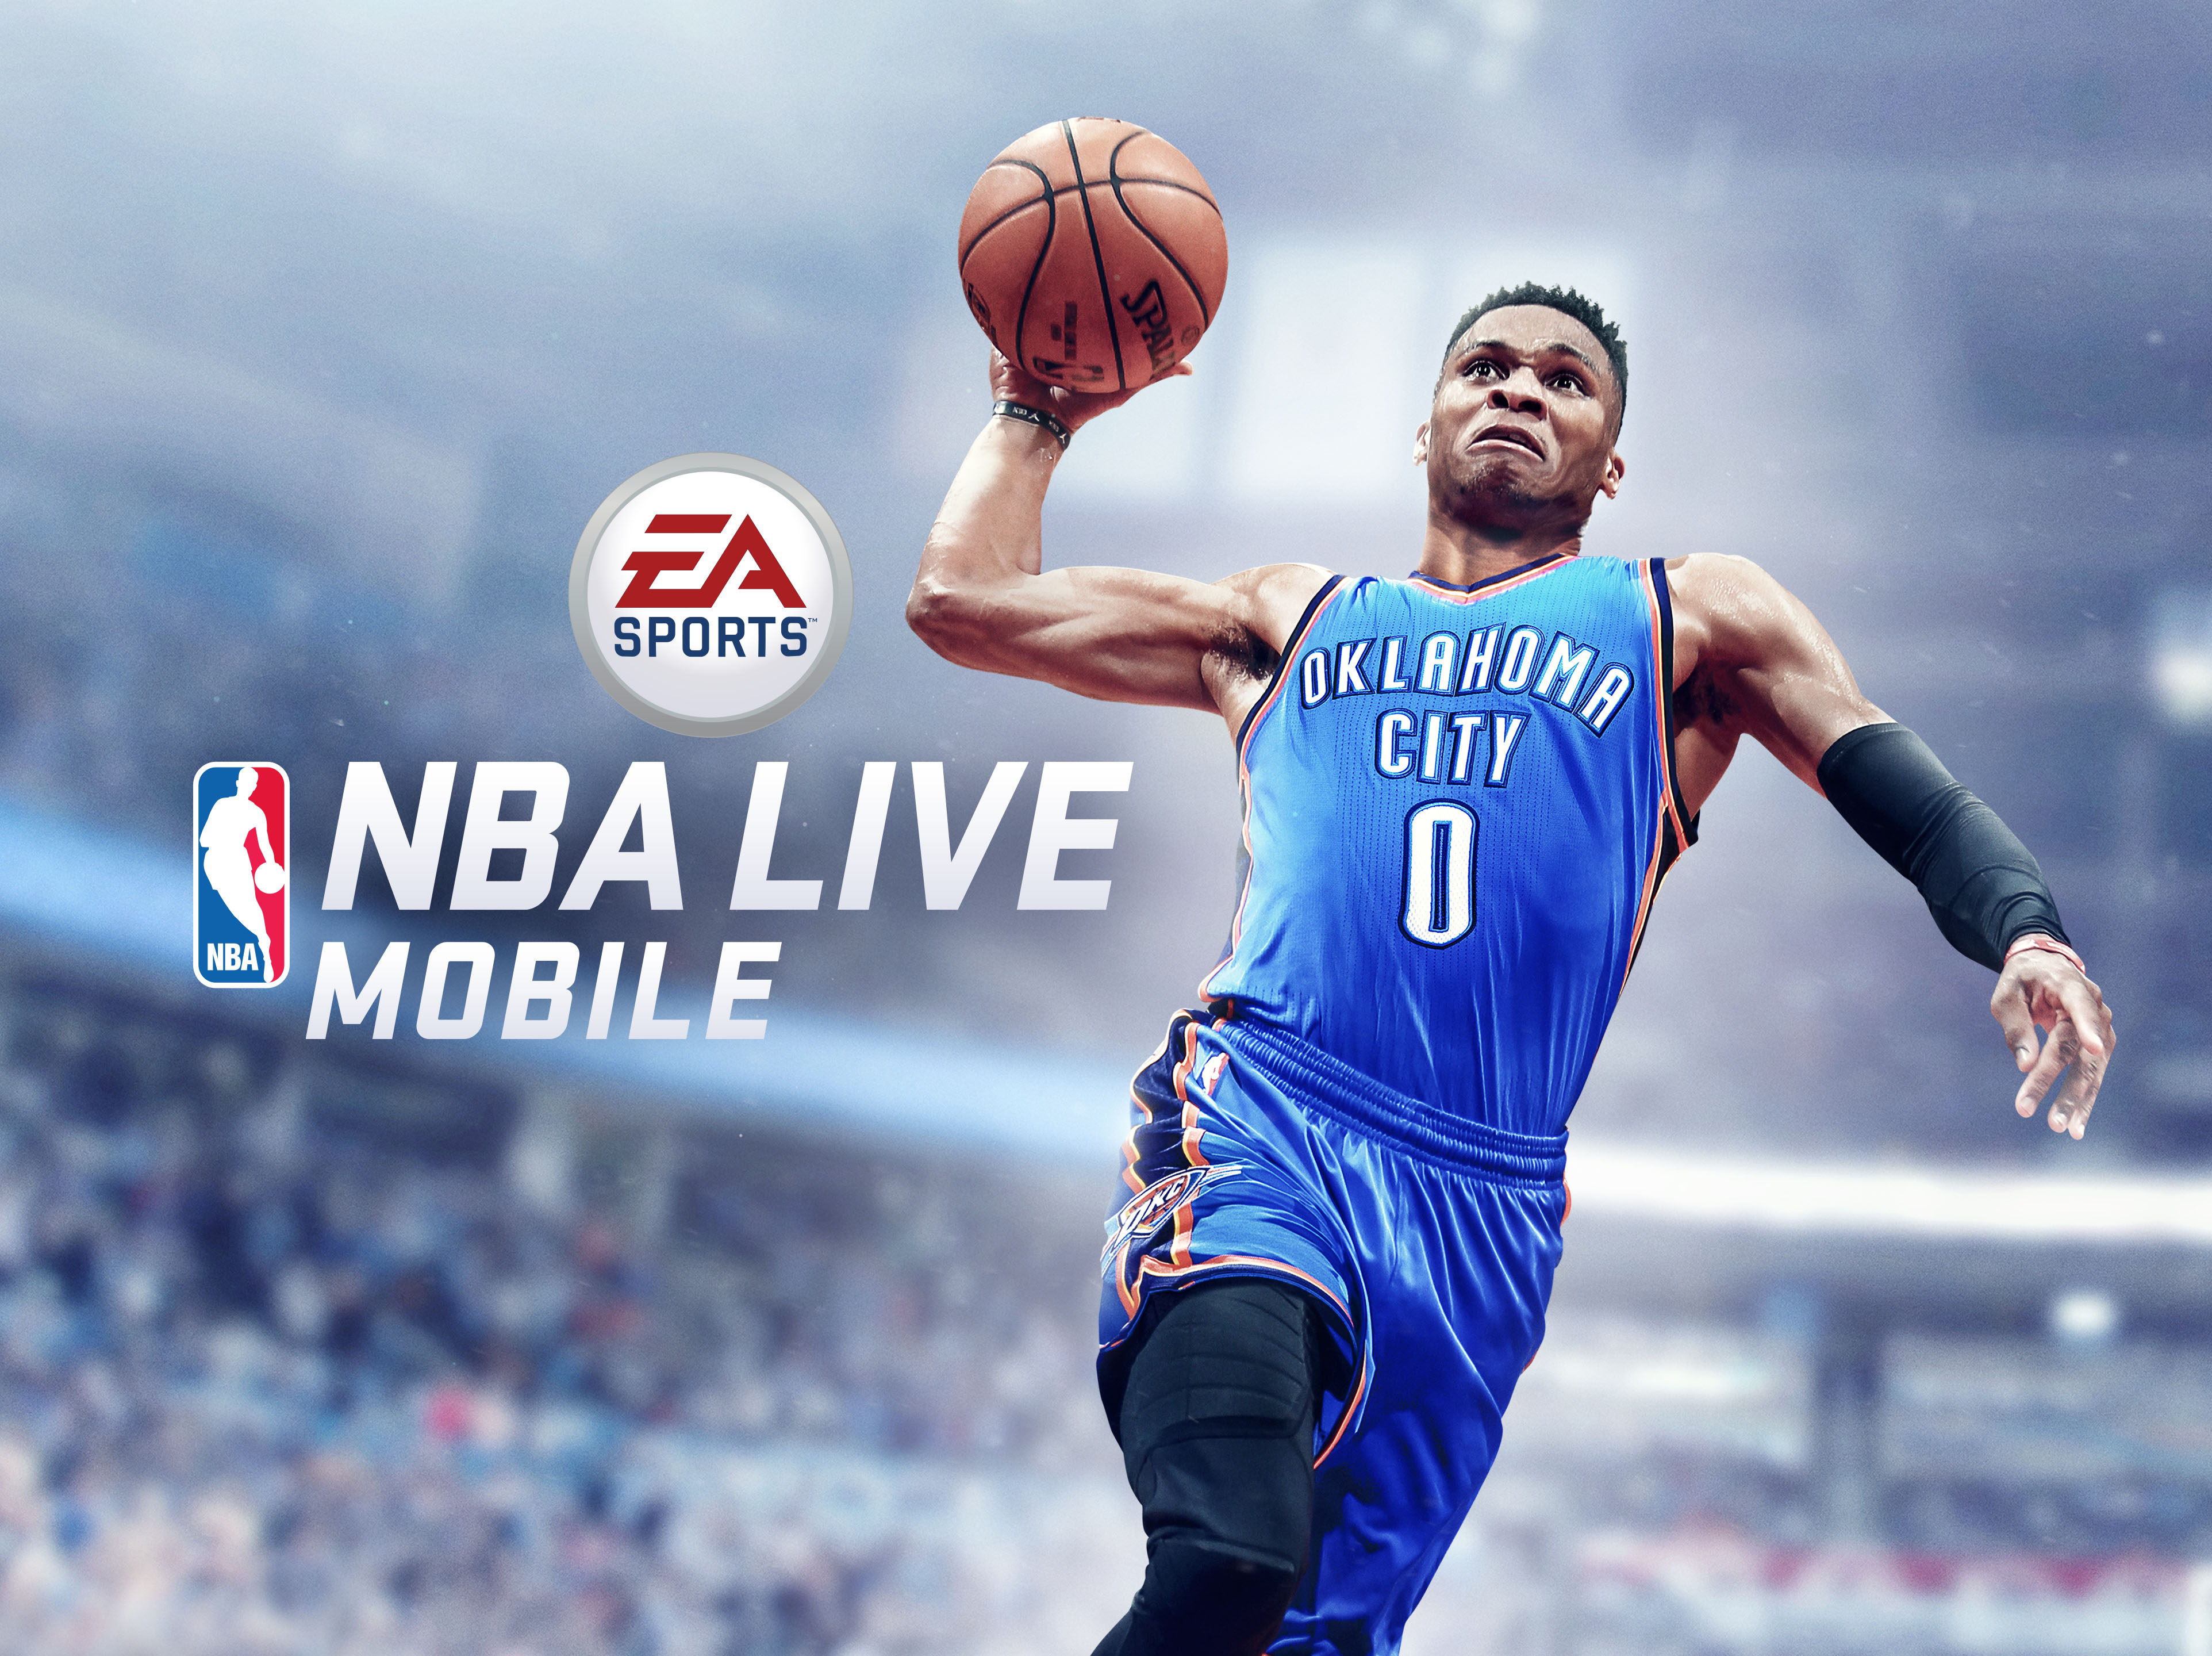 Basketball Season Ends With Launch of EA NBA LIVE | Business Wire